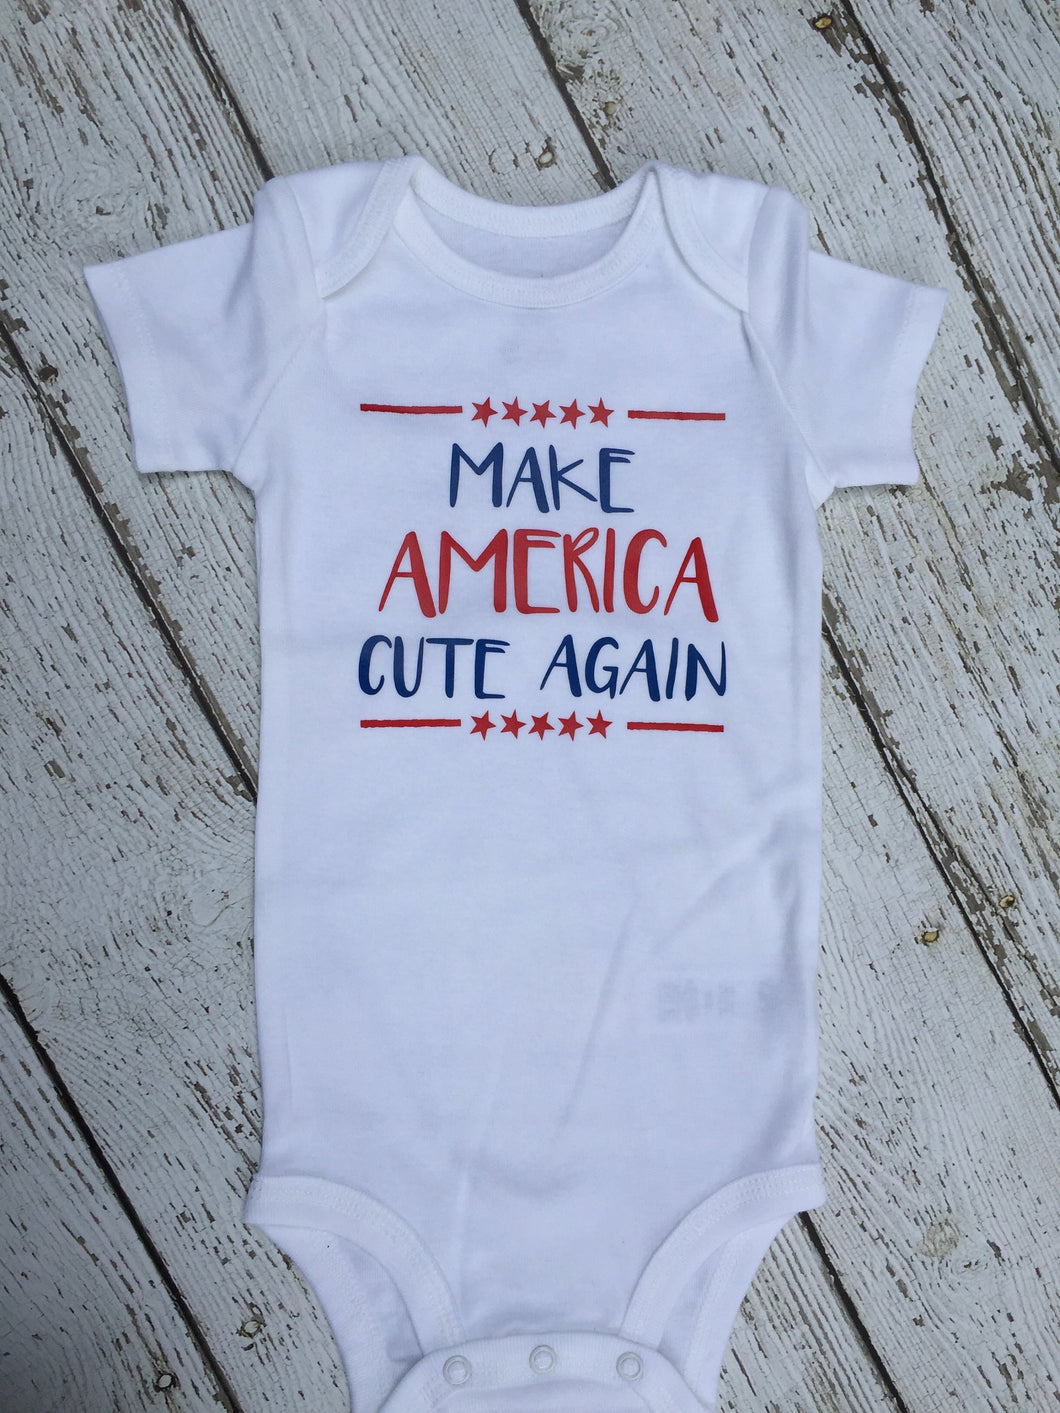 Make America Cute Again Baby Outfit, Baby Outfit Make America Cute Again, Donald Trump Baby Outfit, Donald Trump Baby Clothes, Newborn Baby